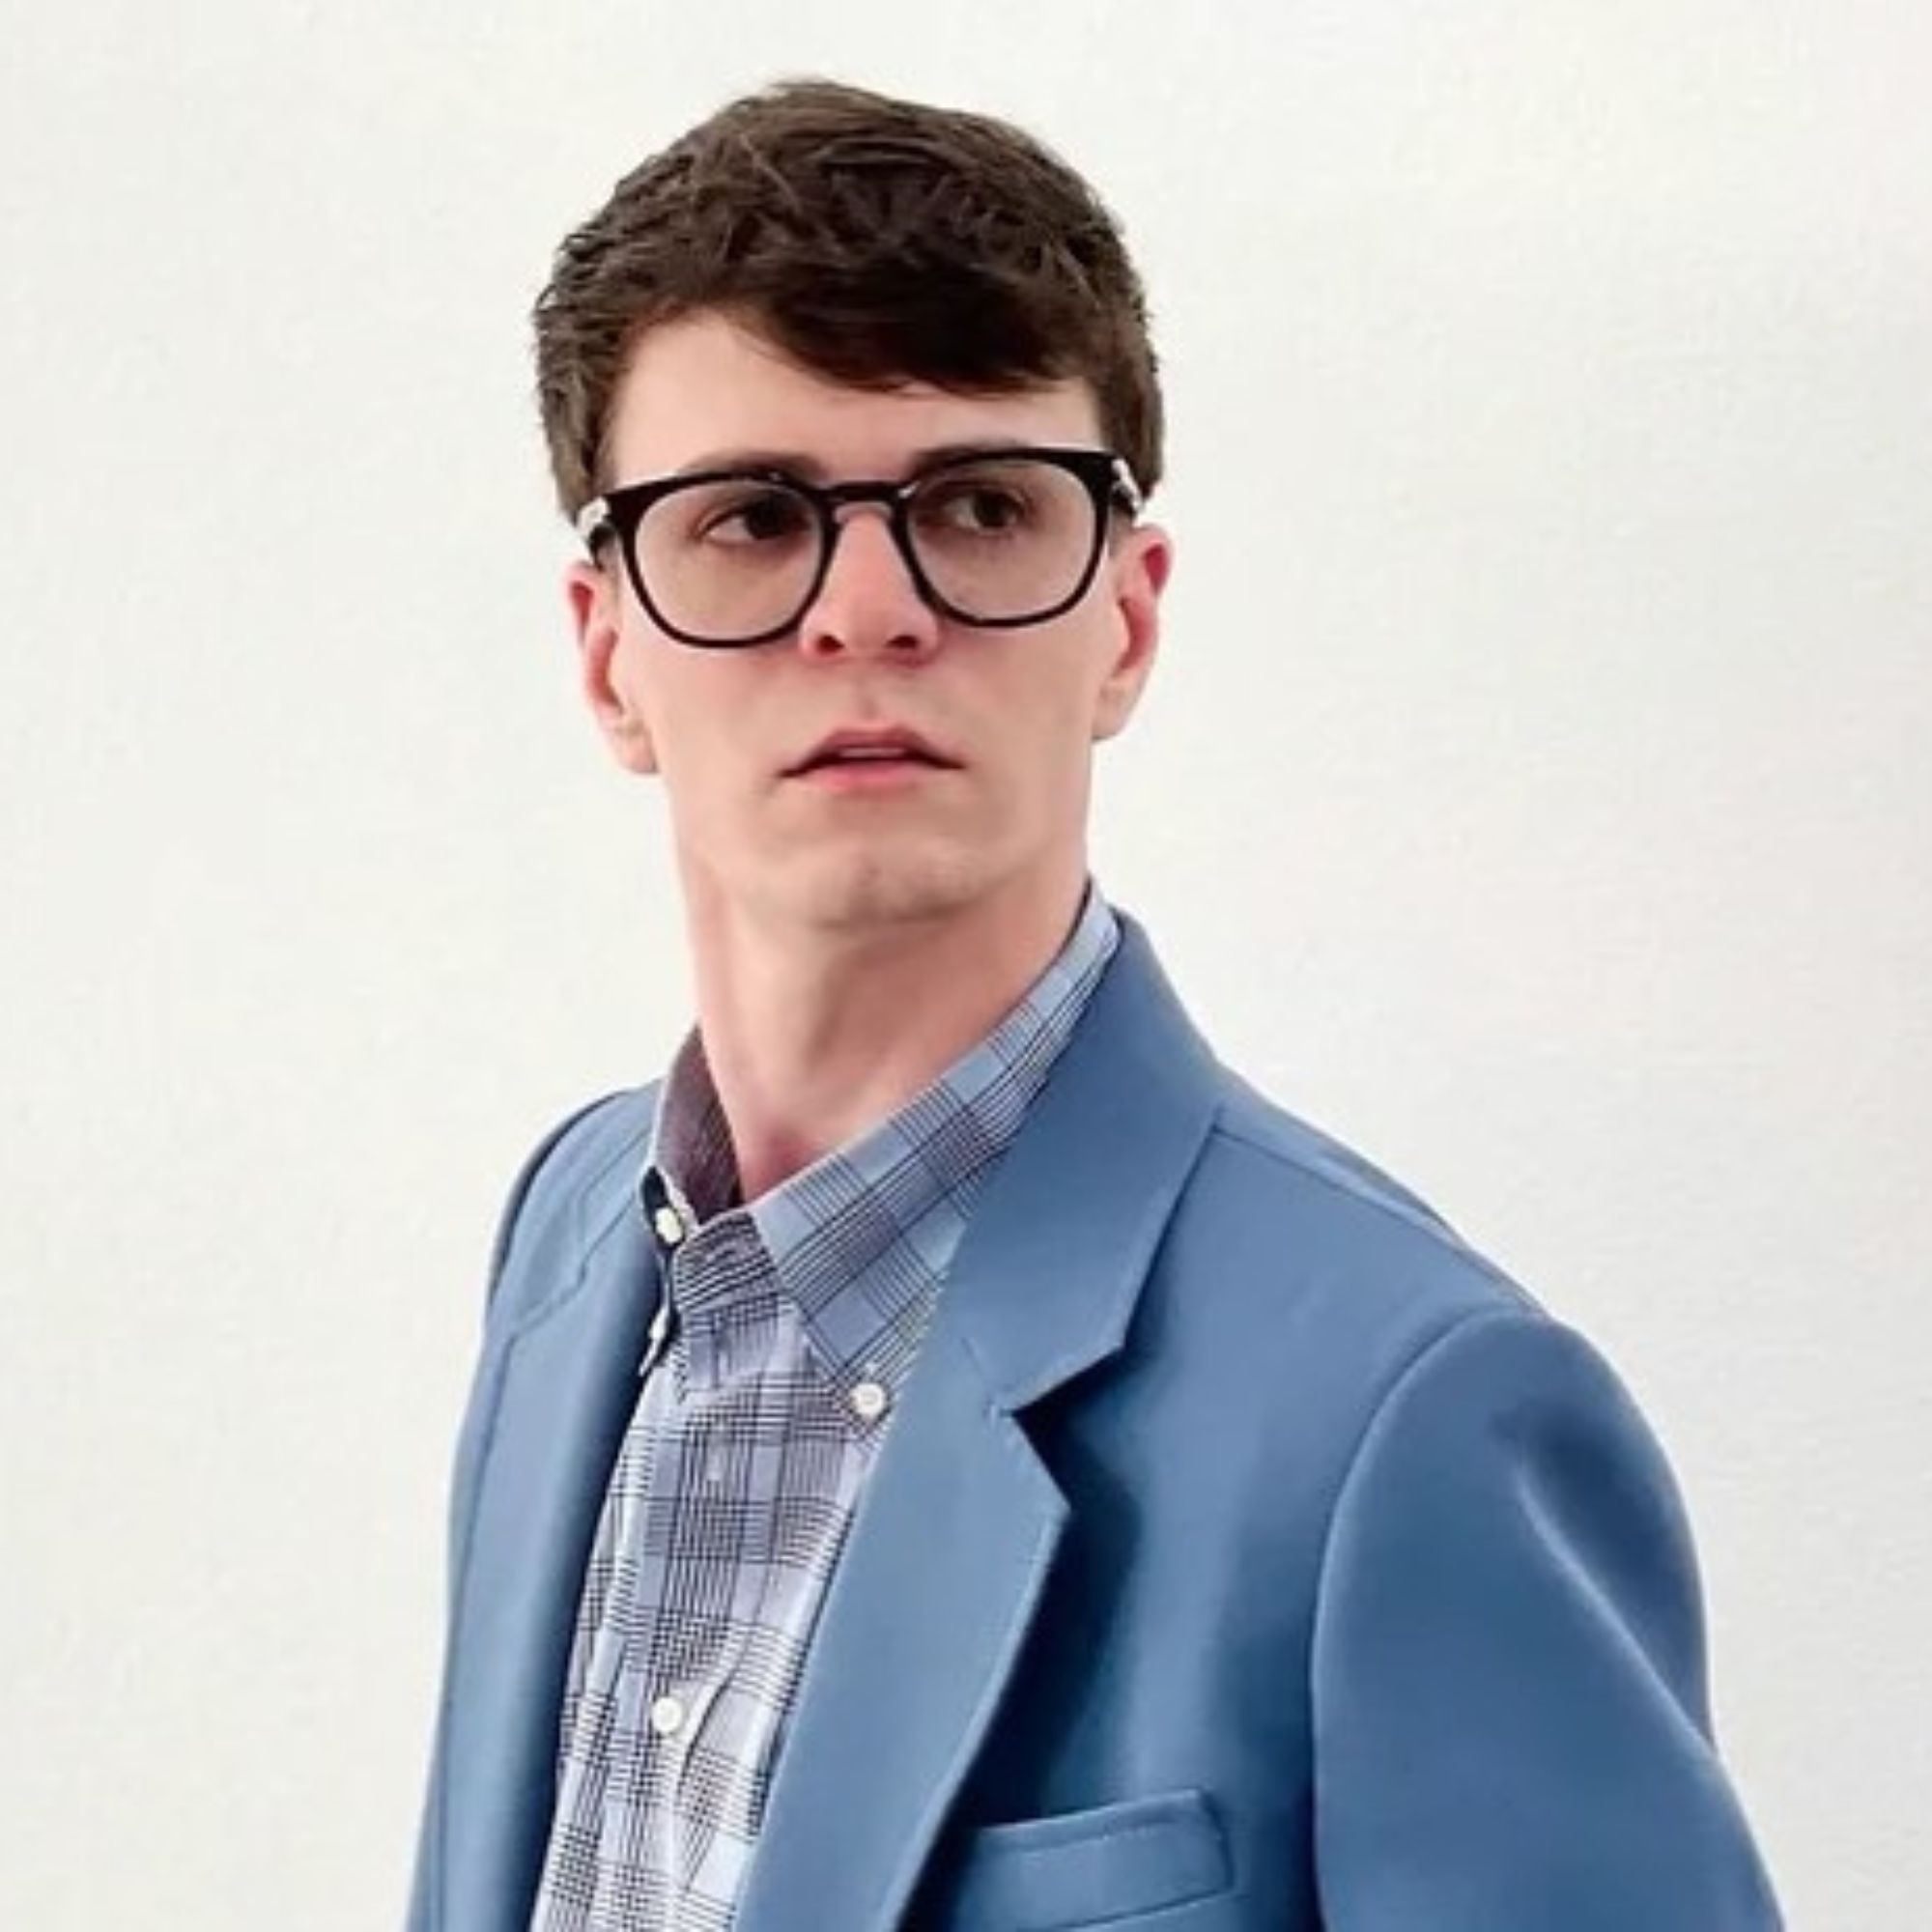 A picture of Michael-Chase Strollo, a man wearing a blue checked shirt and blazer with brown hair and black glasses